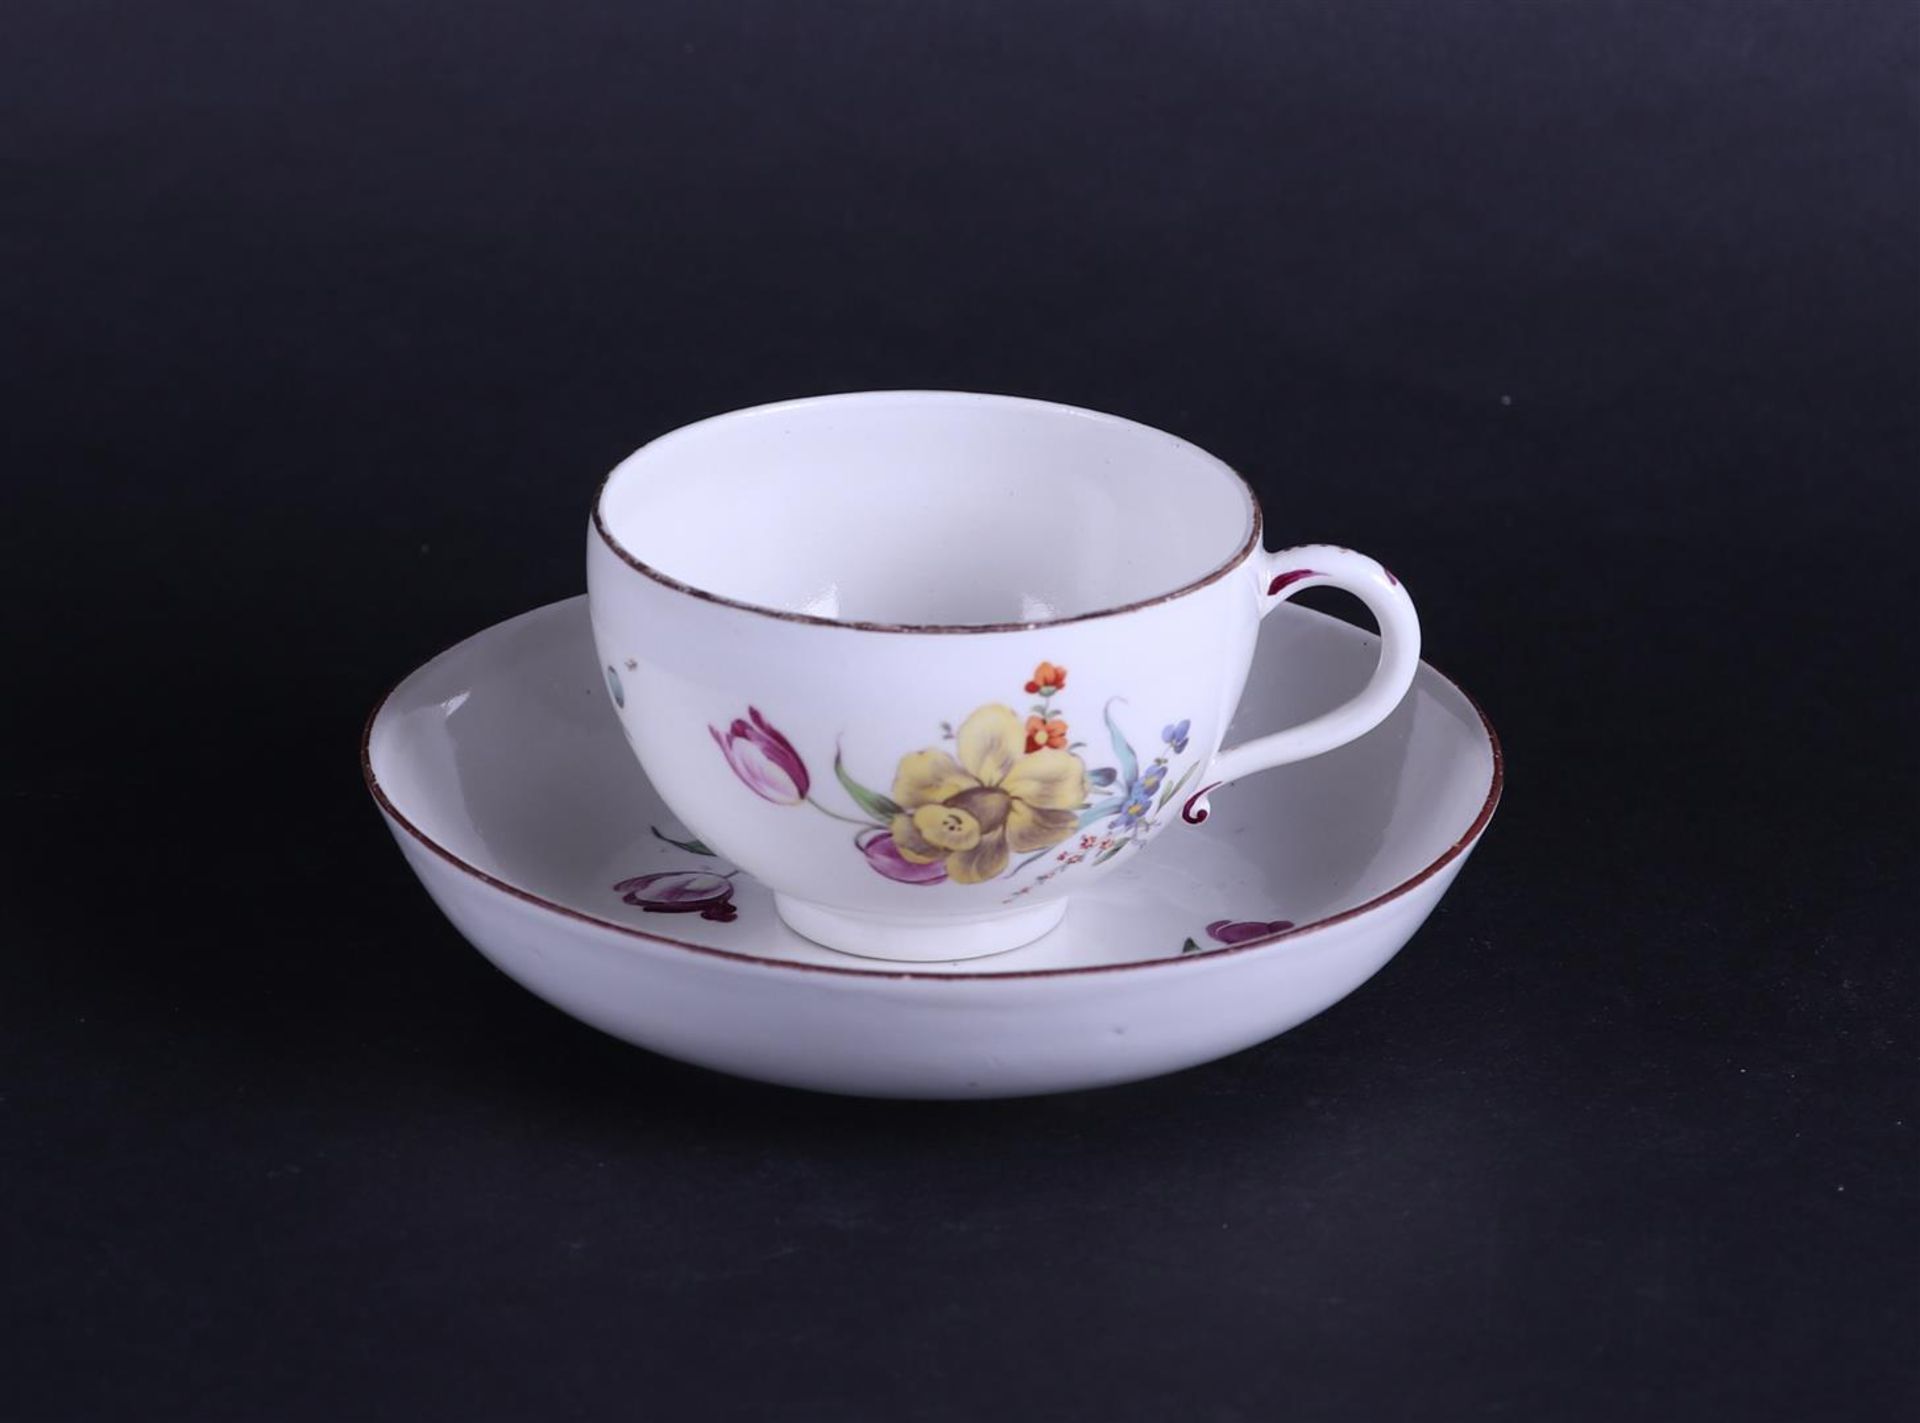 A porcelain cup and saucer with rich, polychrome floral decoration. German, Höchst 18th century.